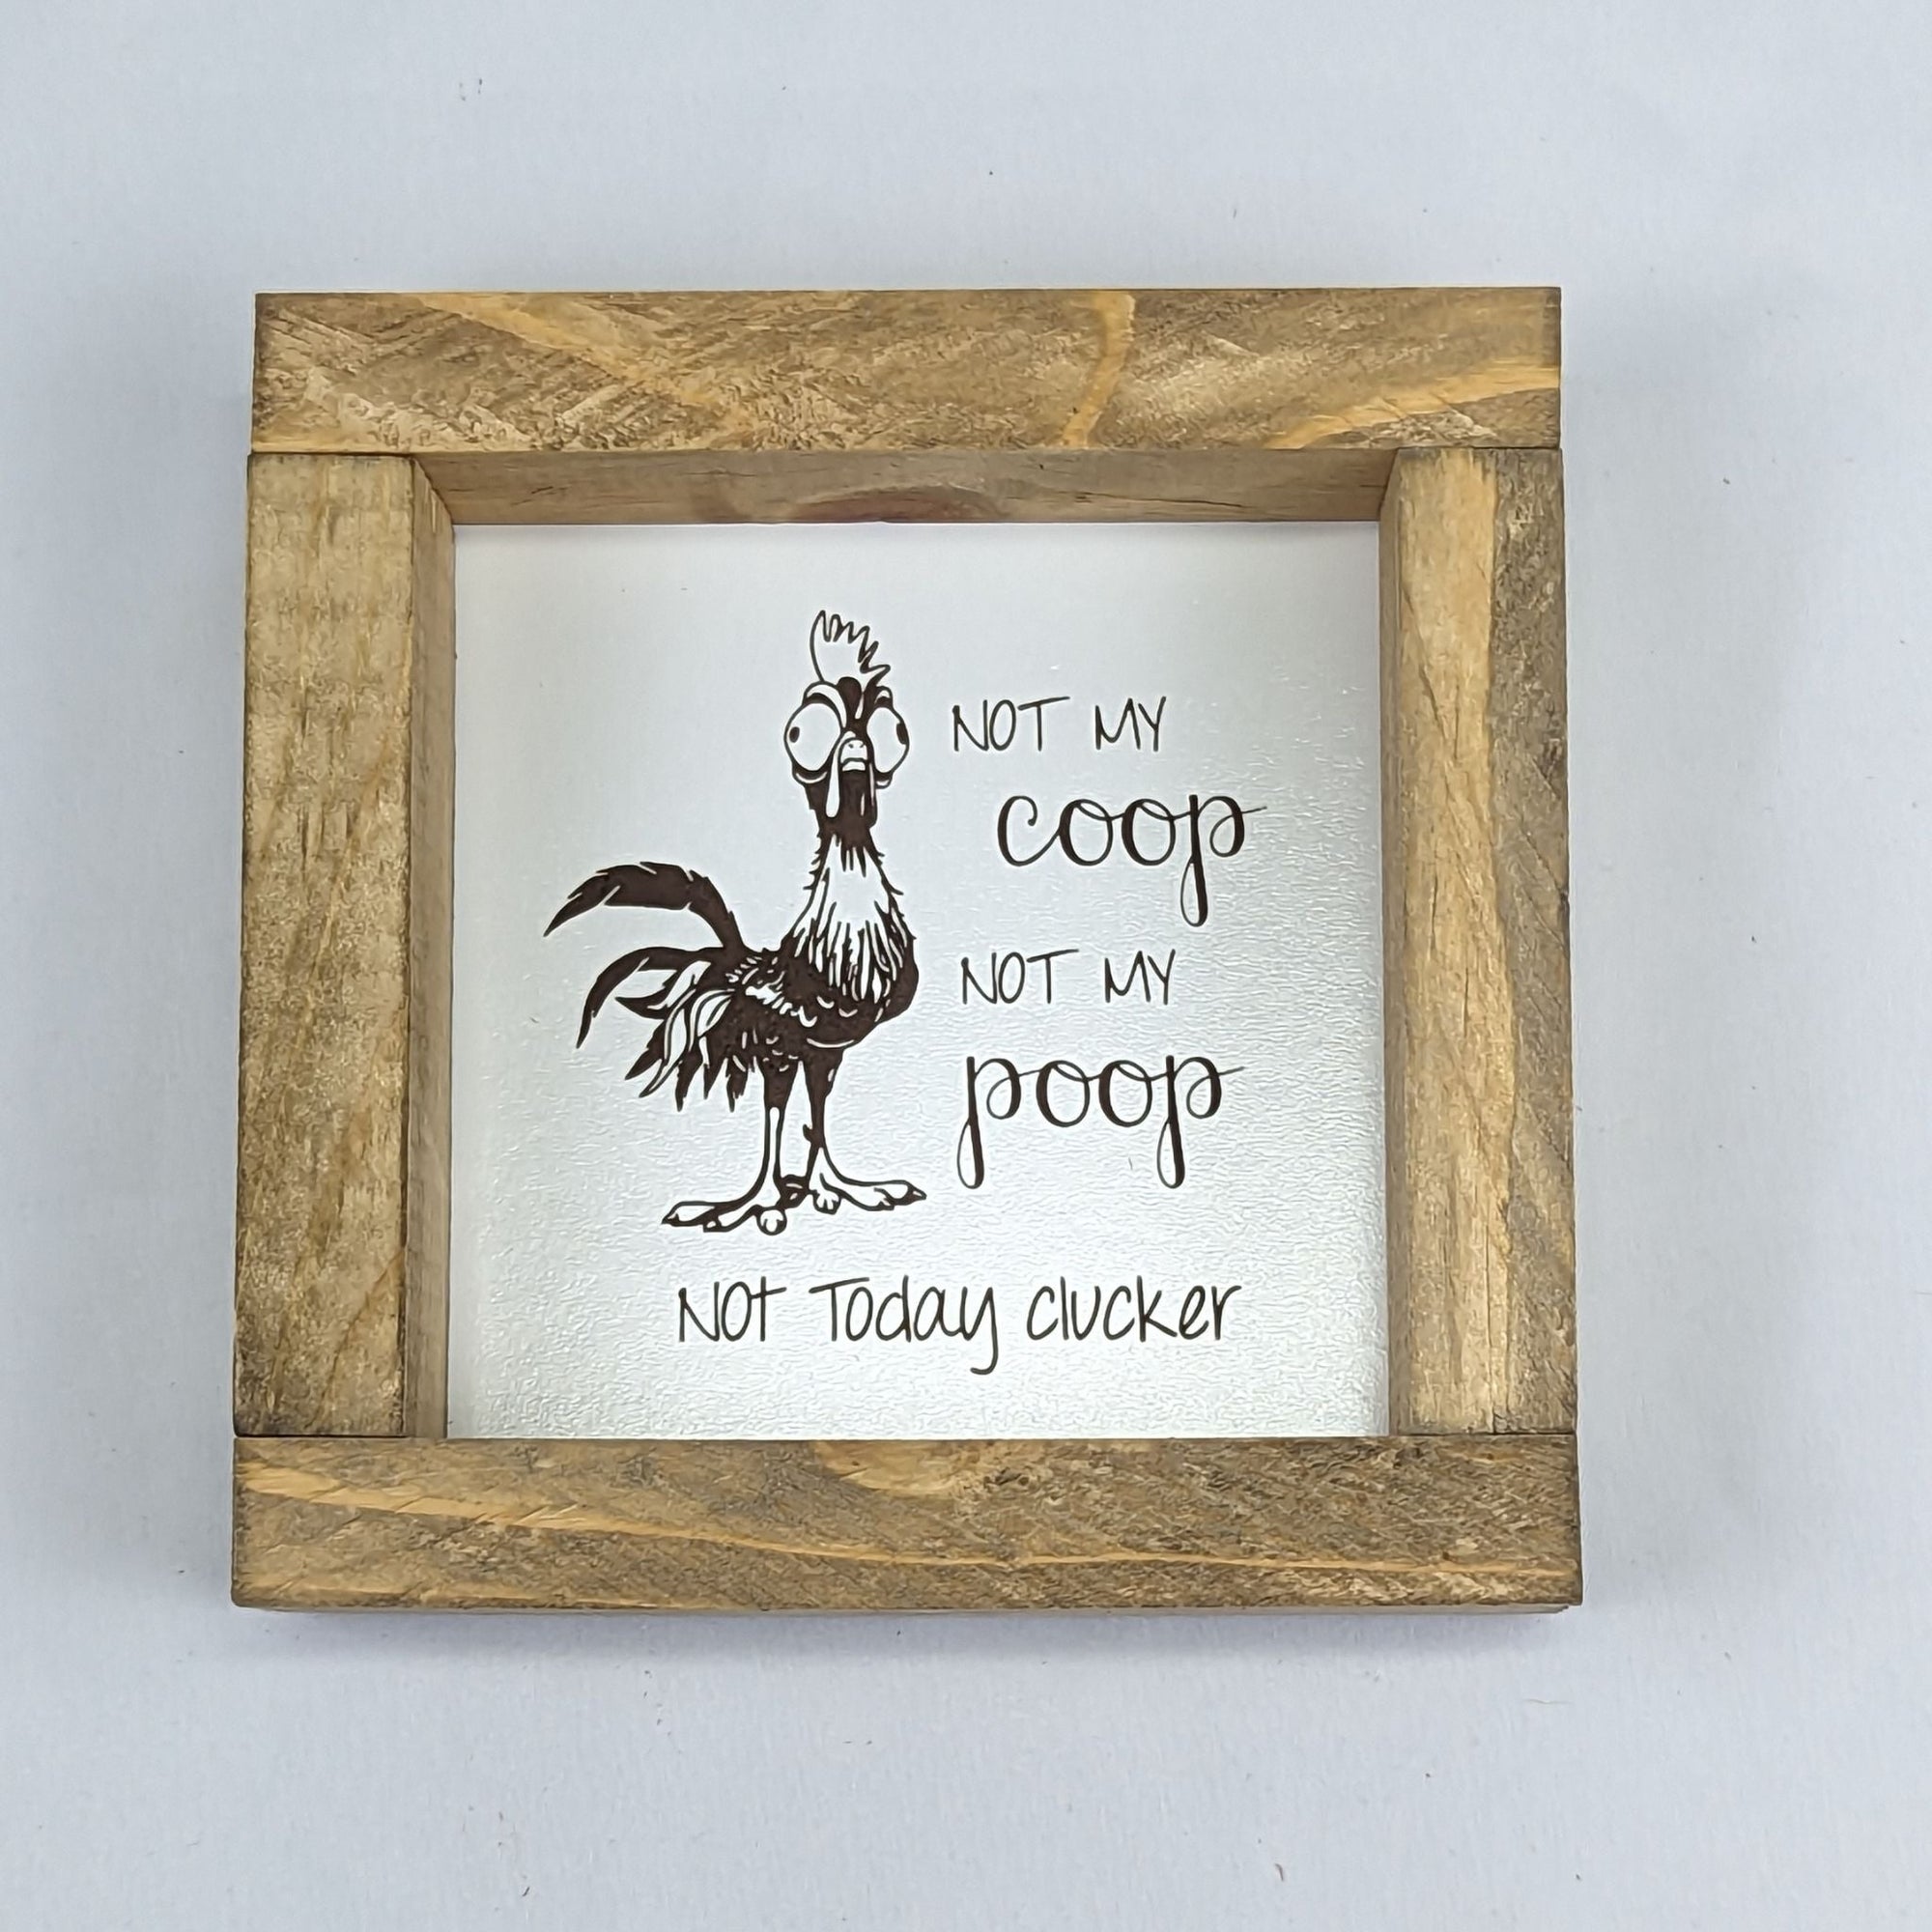 6" x 6" 'Not My Coop' Chicken Sign With Wood Frame - Cluck It All Farms